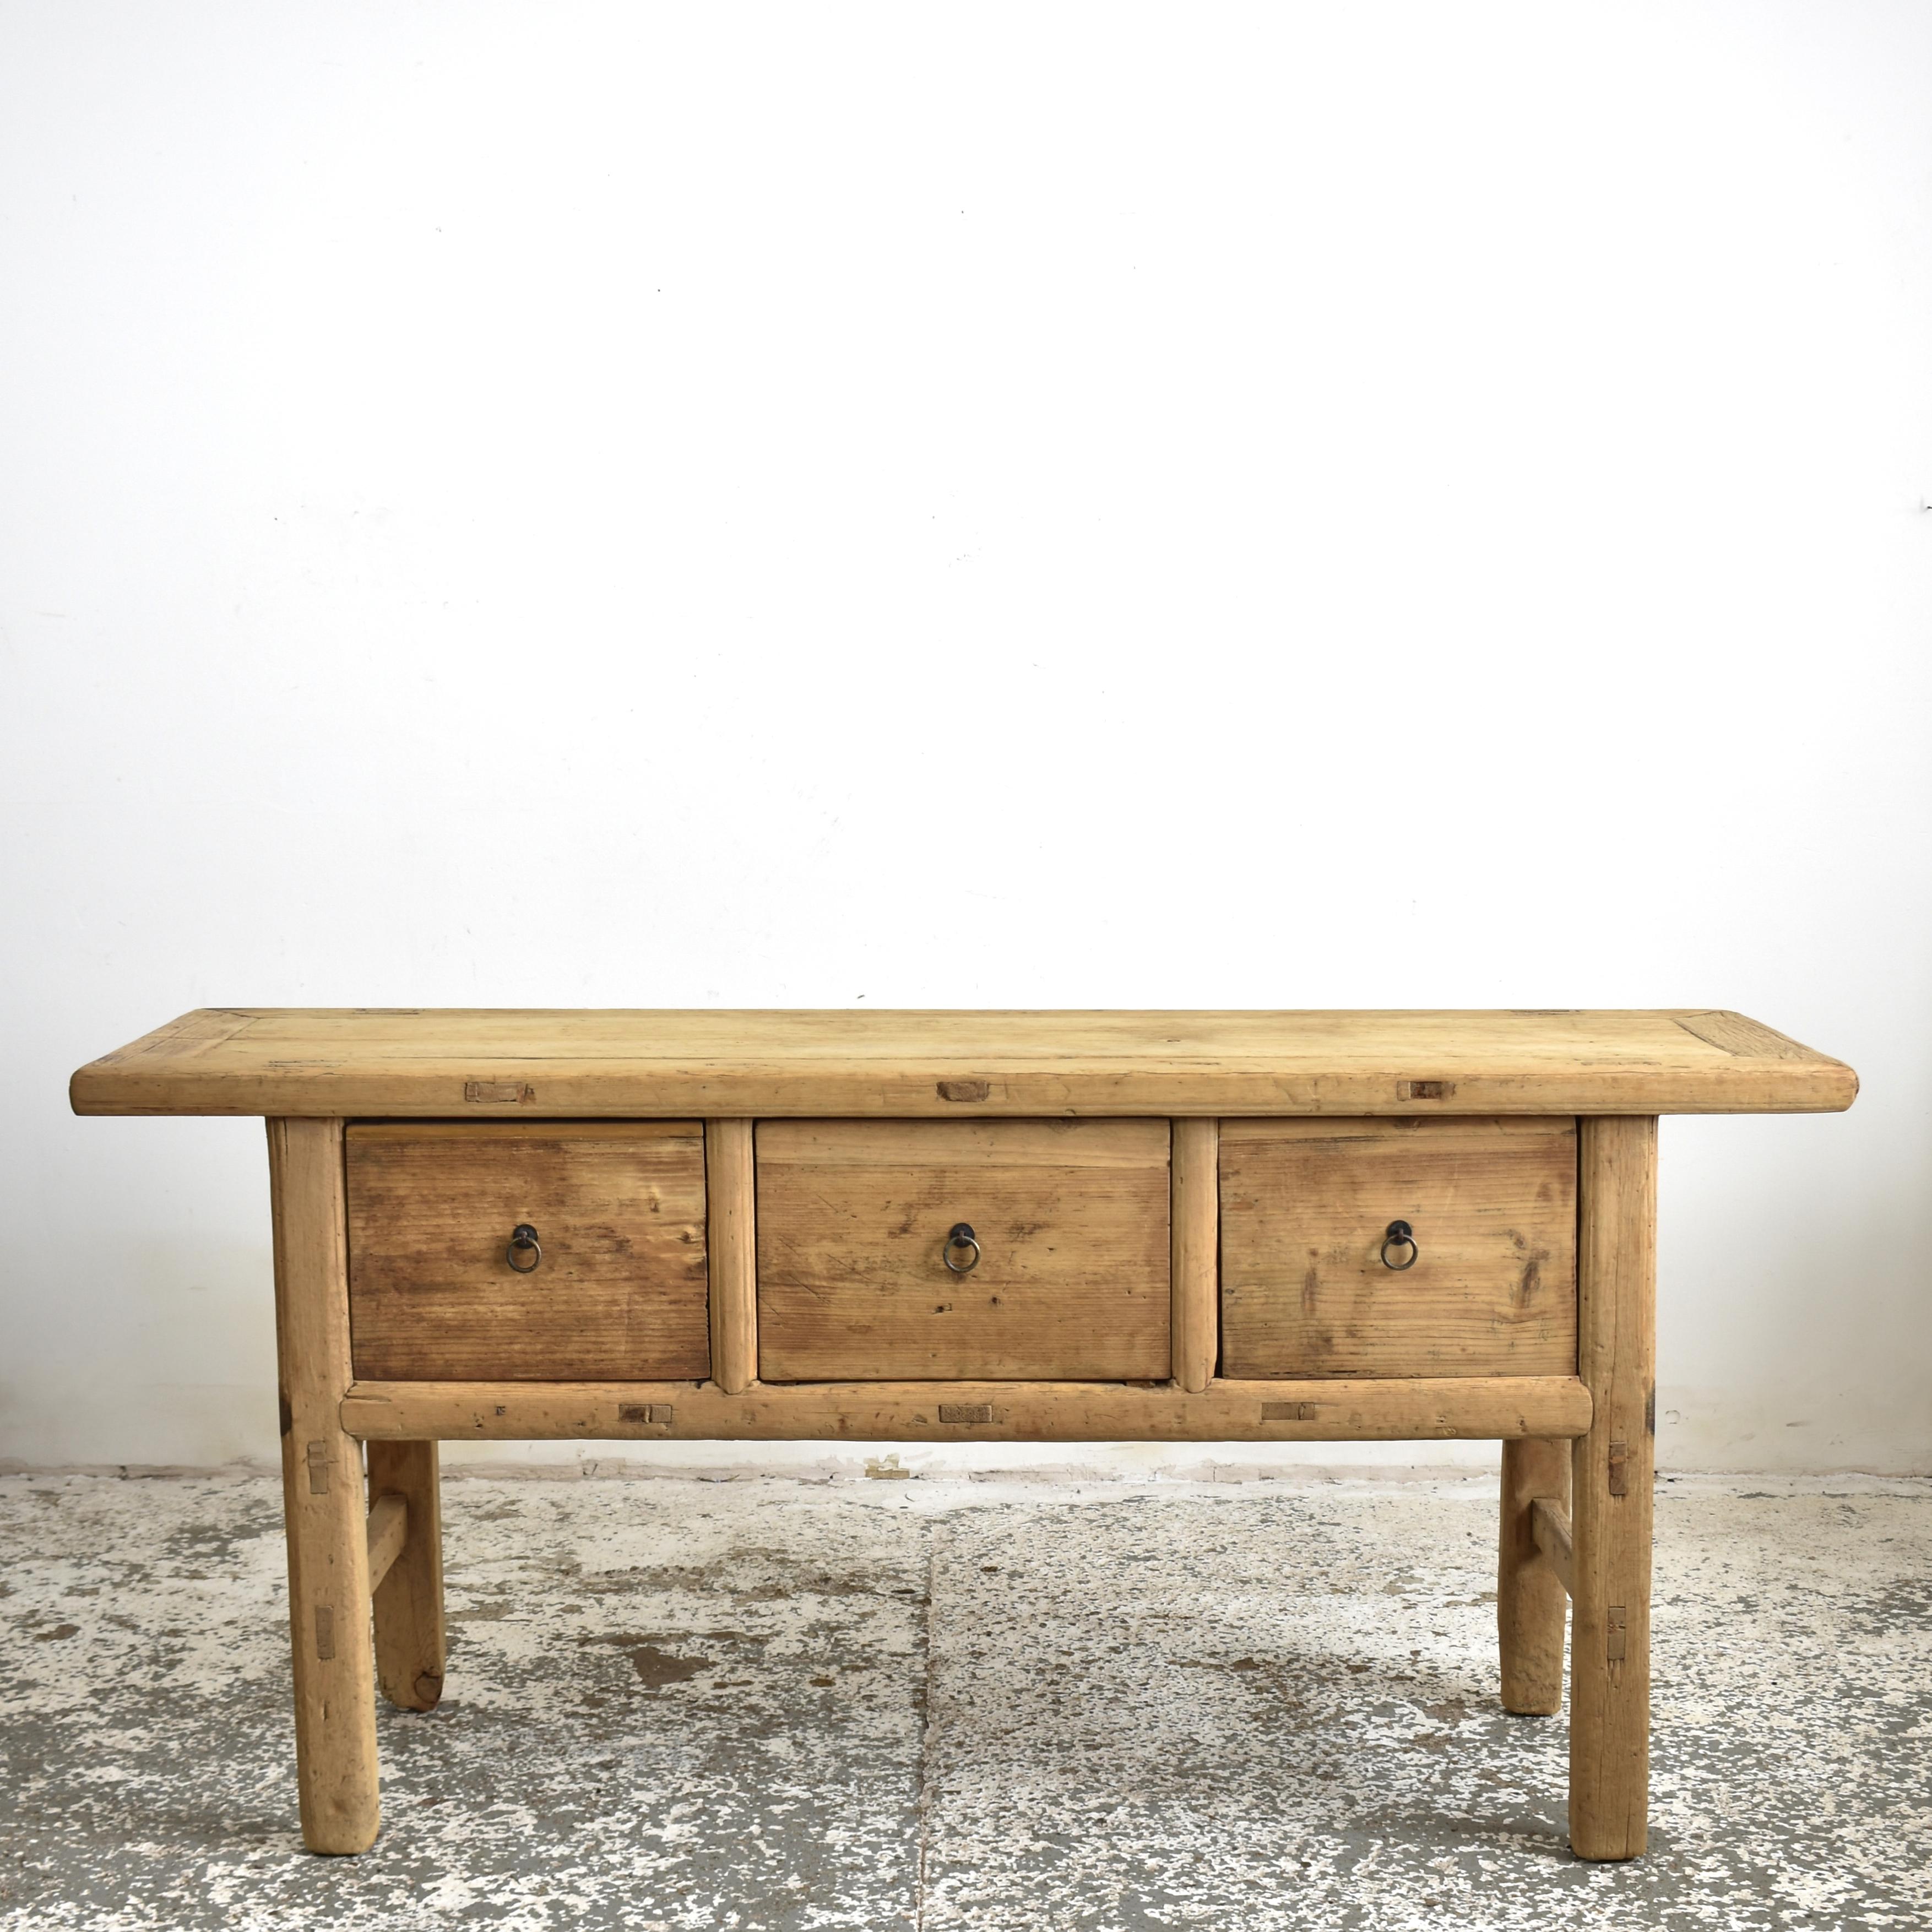 Rustic Antique Elm Console Table Shop Counter Kitchen Island

A lovely vintage wooden elm console table. A versatile table which would function equally well in the hall as a console, kitchen as an island or in a shop as a counter. The table has